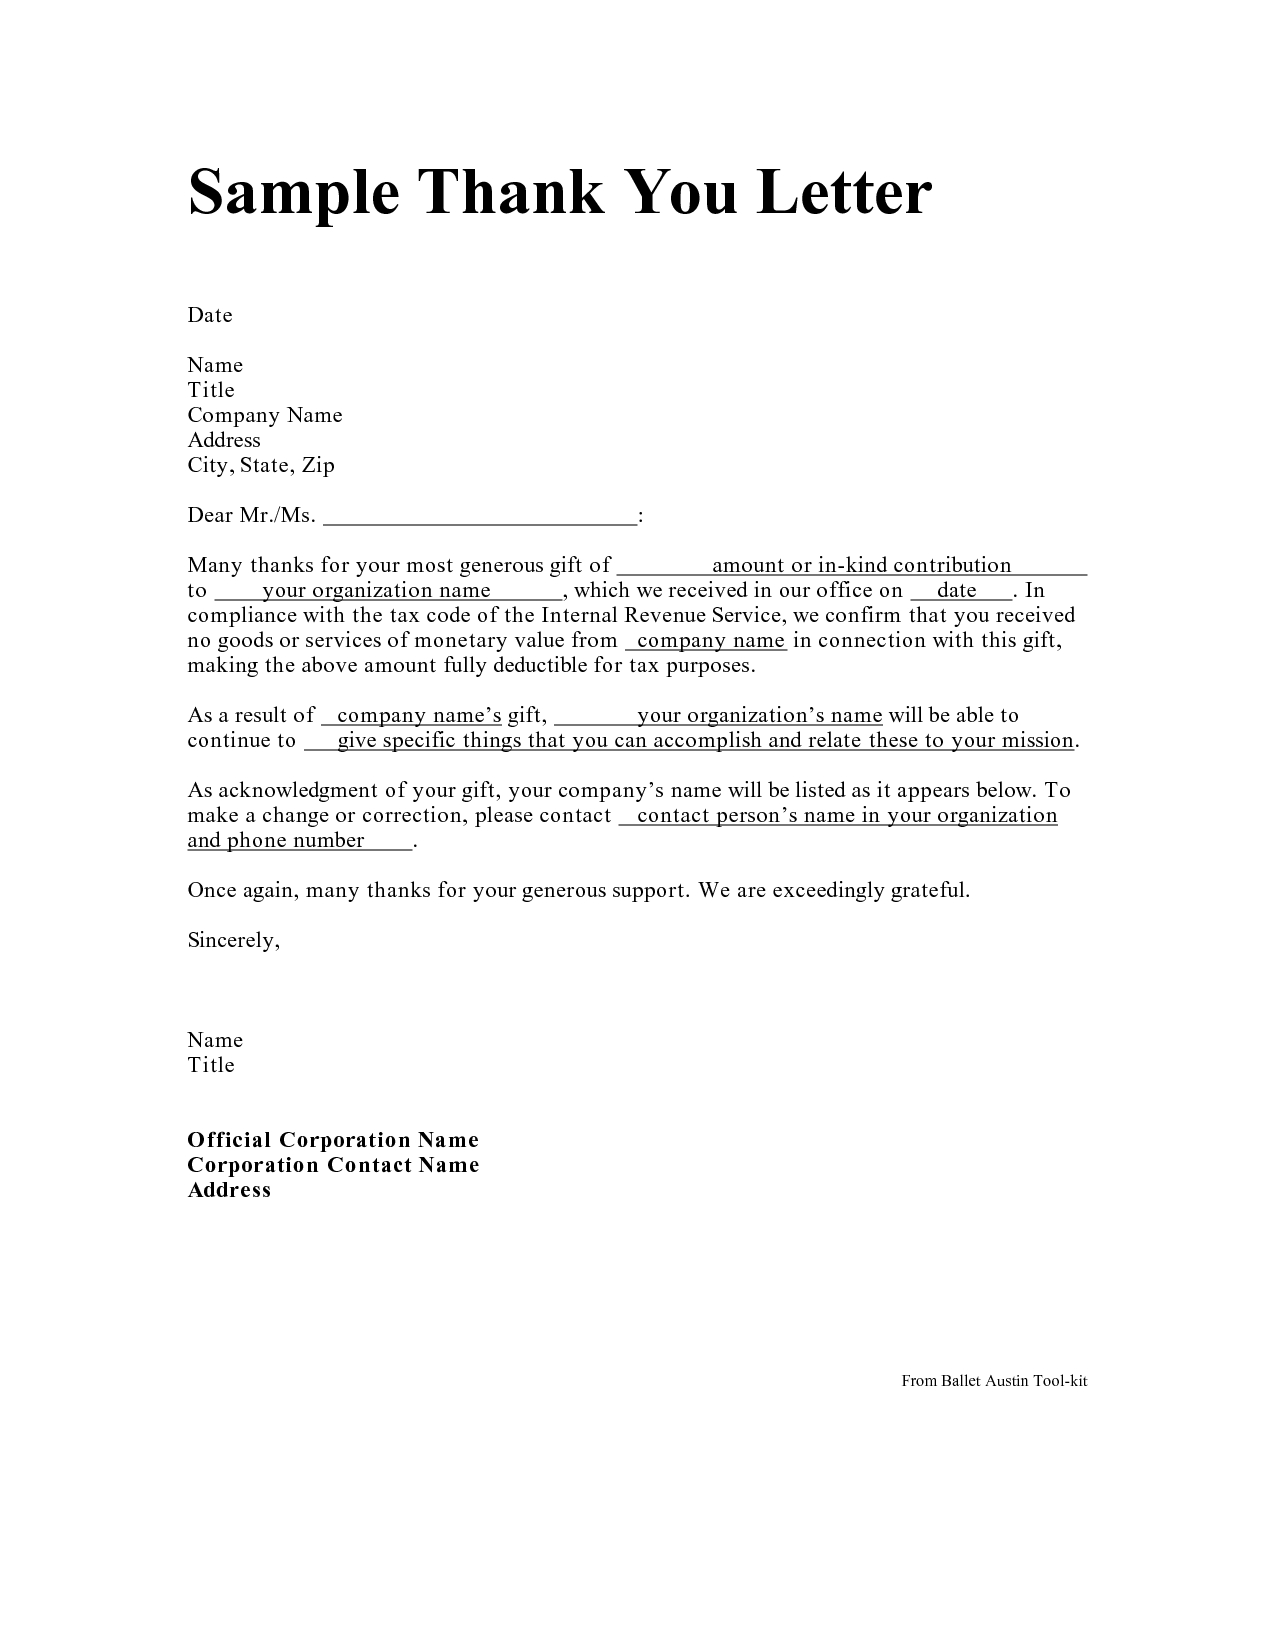 Letter format Template - format Of Thank You Letter Acurnamedia